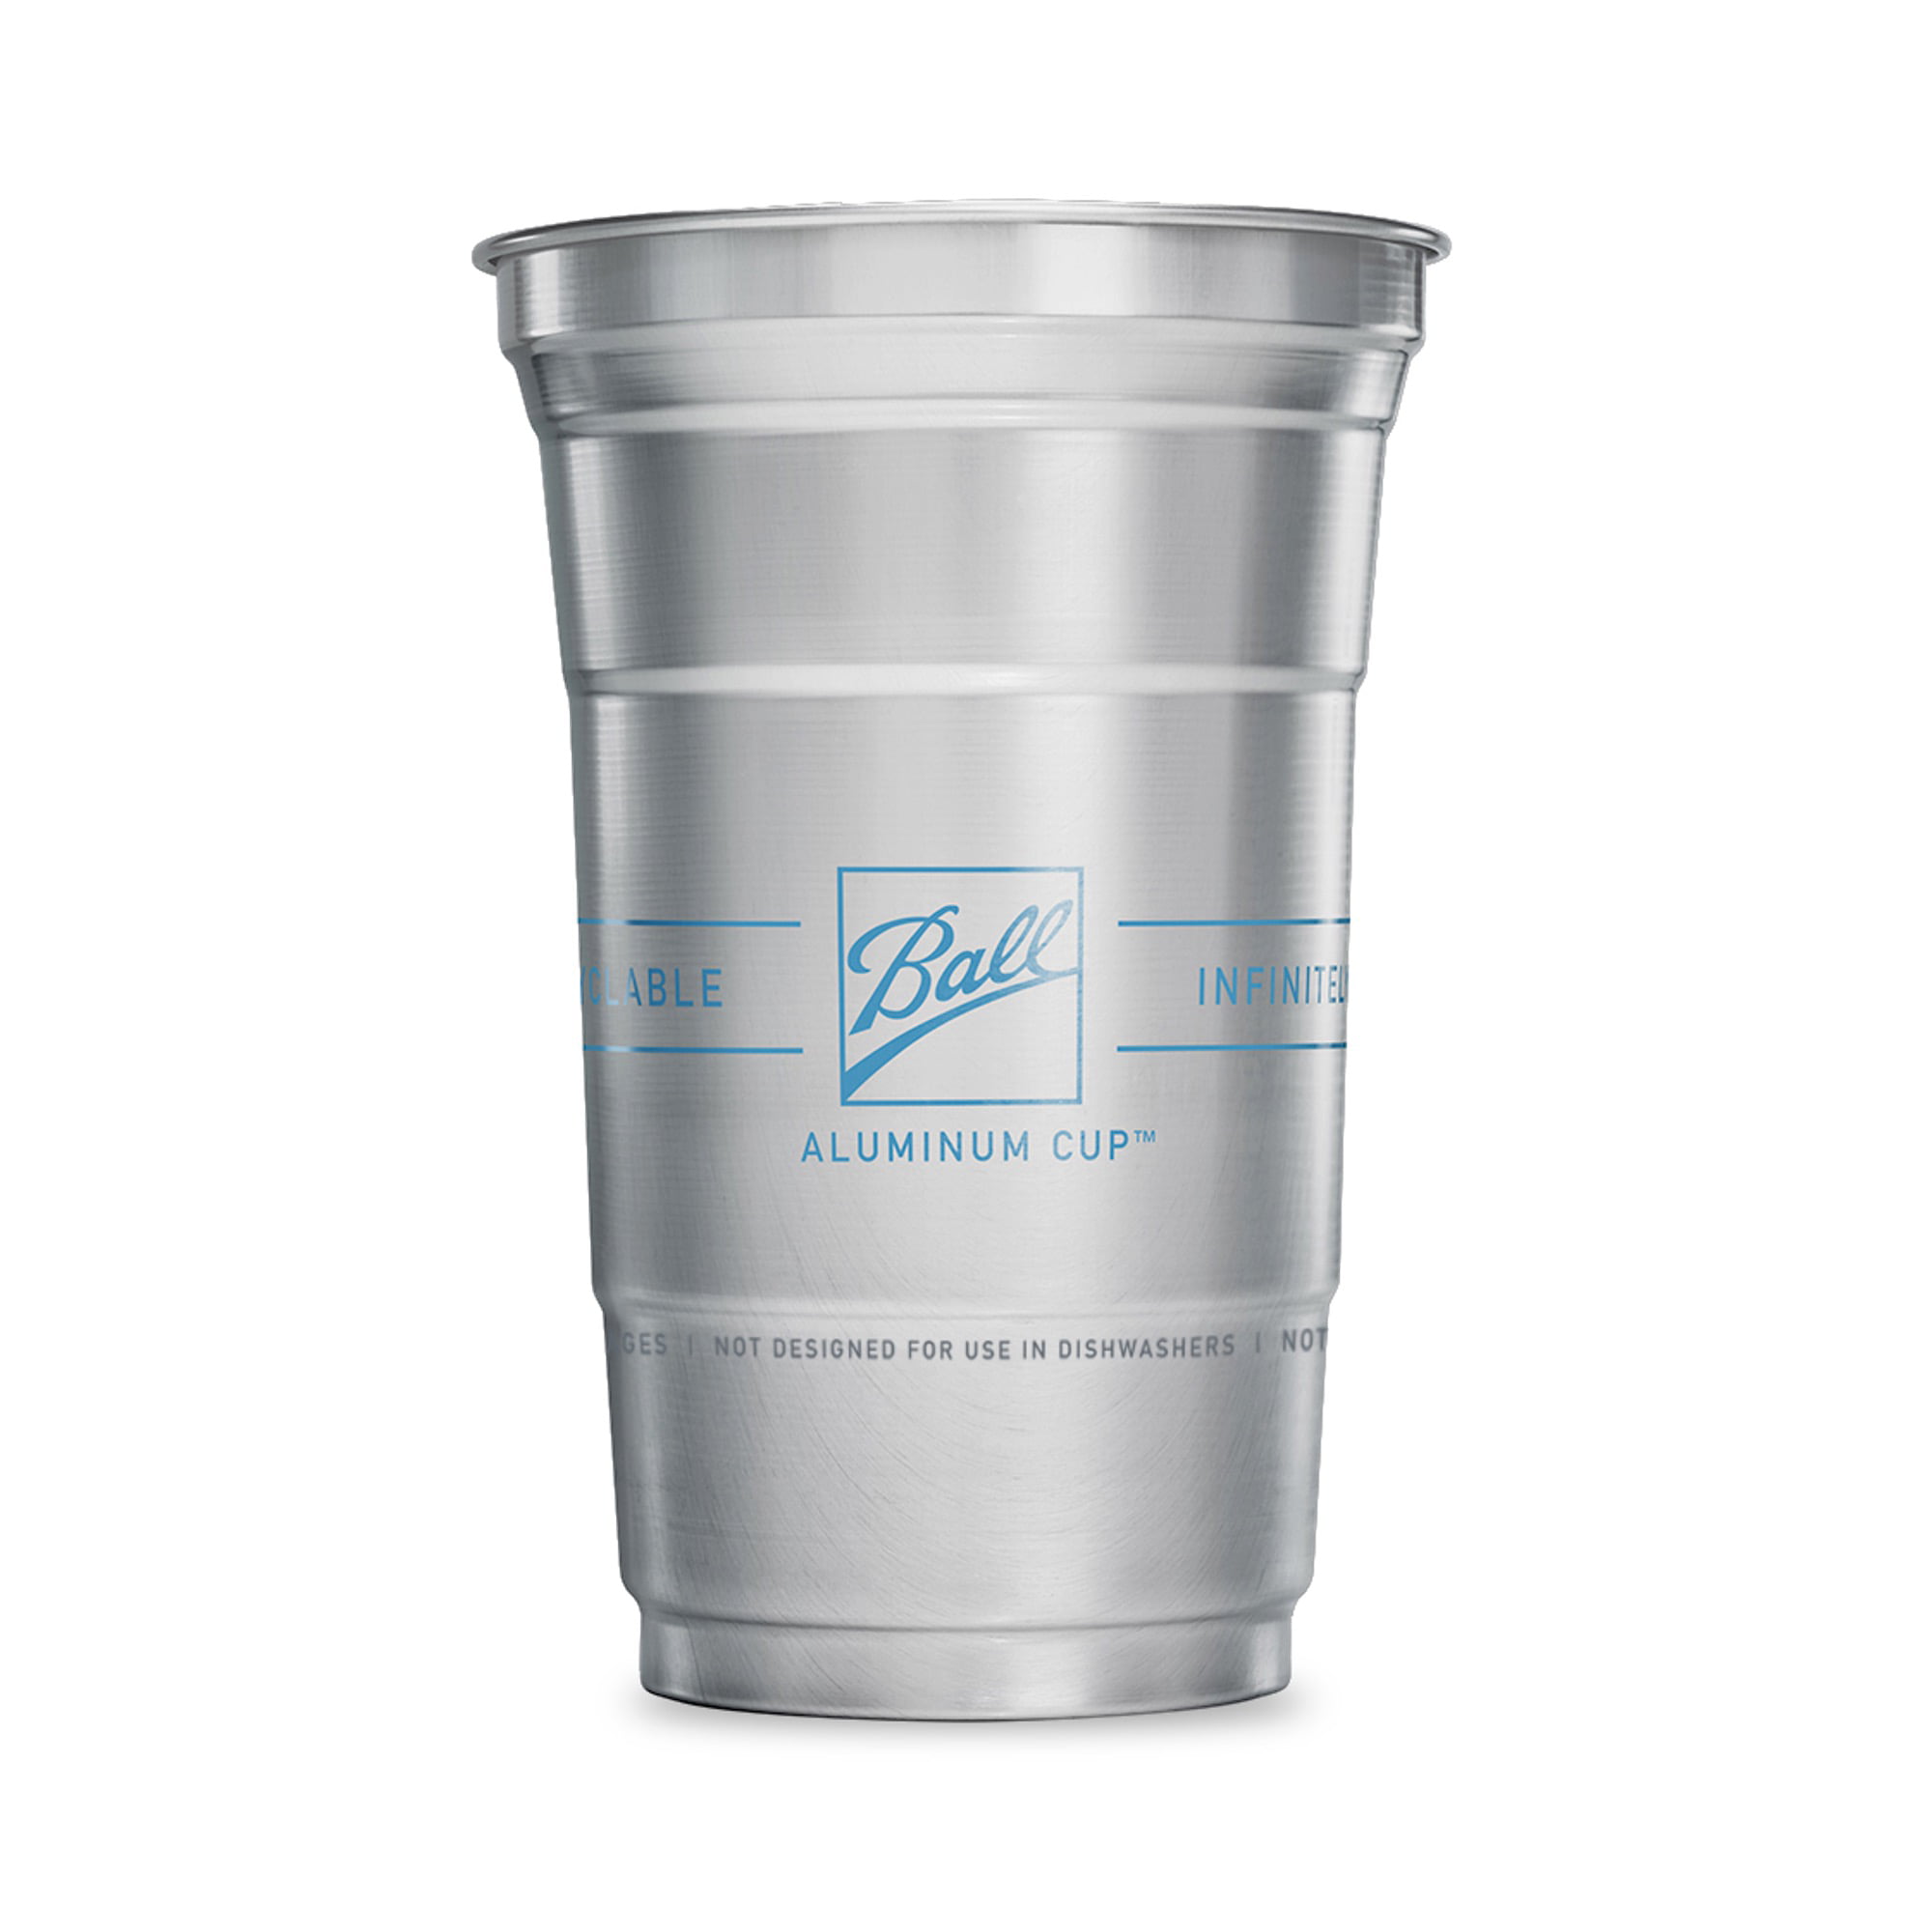 NEW! Ball Aluminum Cup Limited Edition 100% Recyclable Cold Drink Cups 12/ 16oz 810052130224